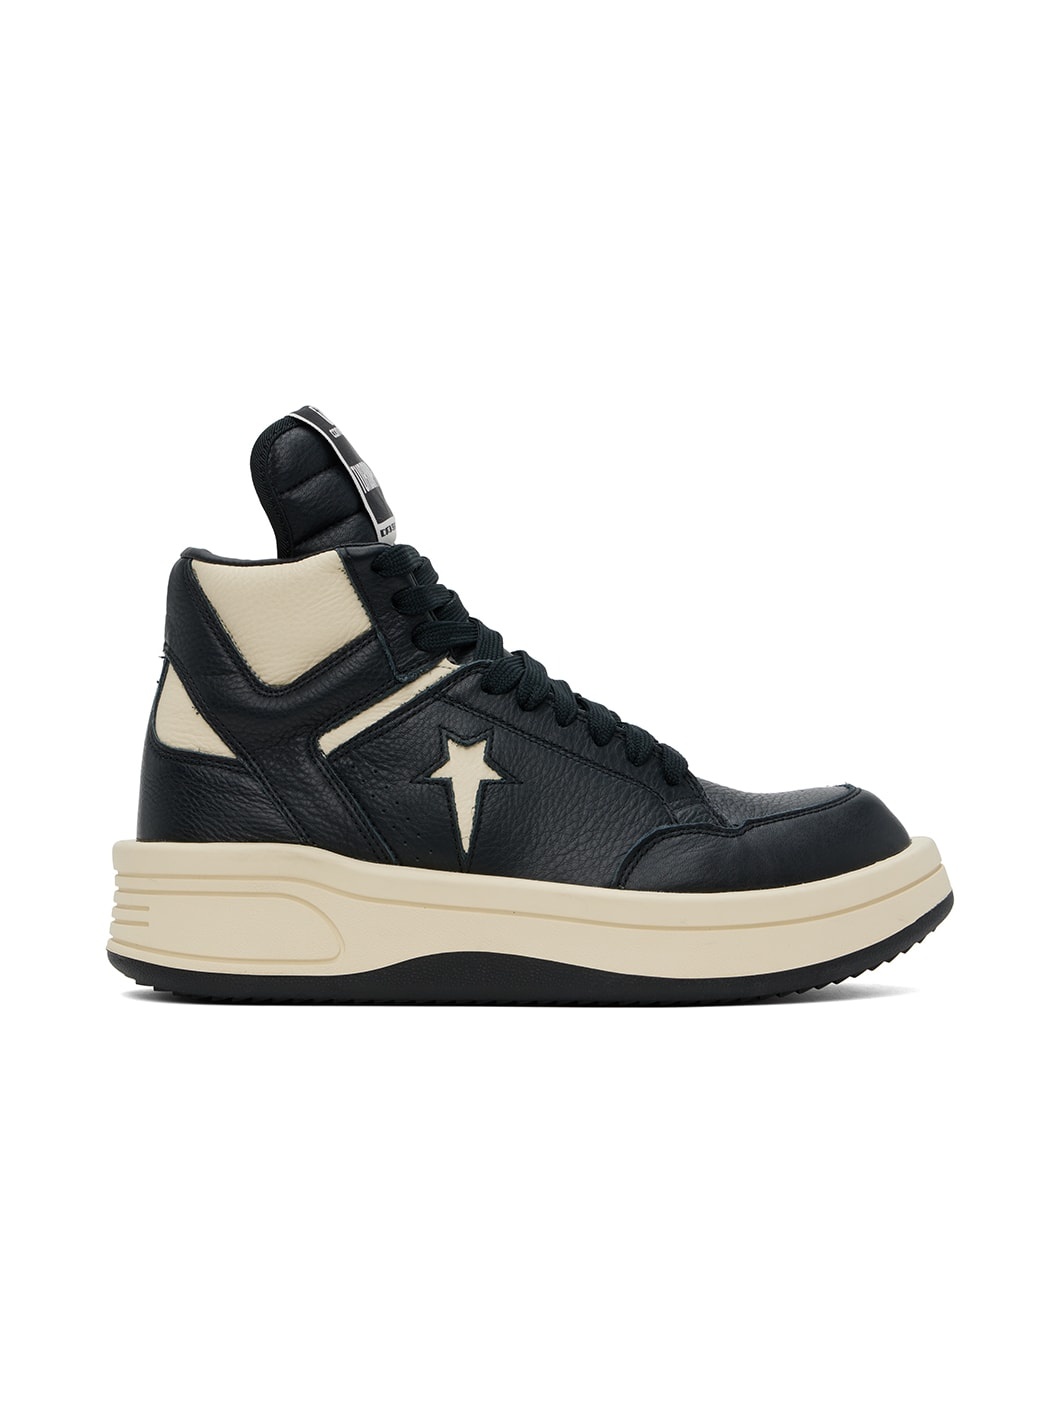 Black Converse Edition TURBOWPN Mid Sneakers - 1